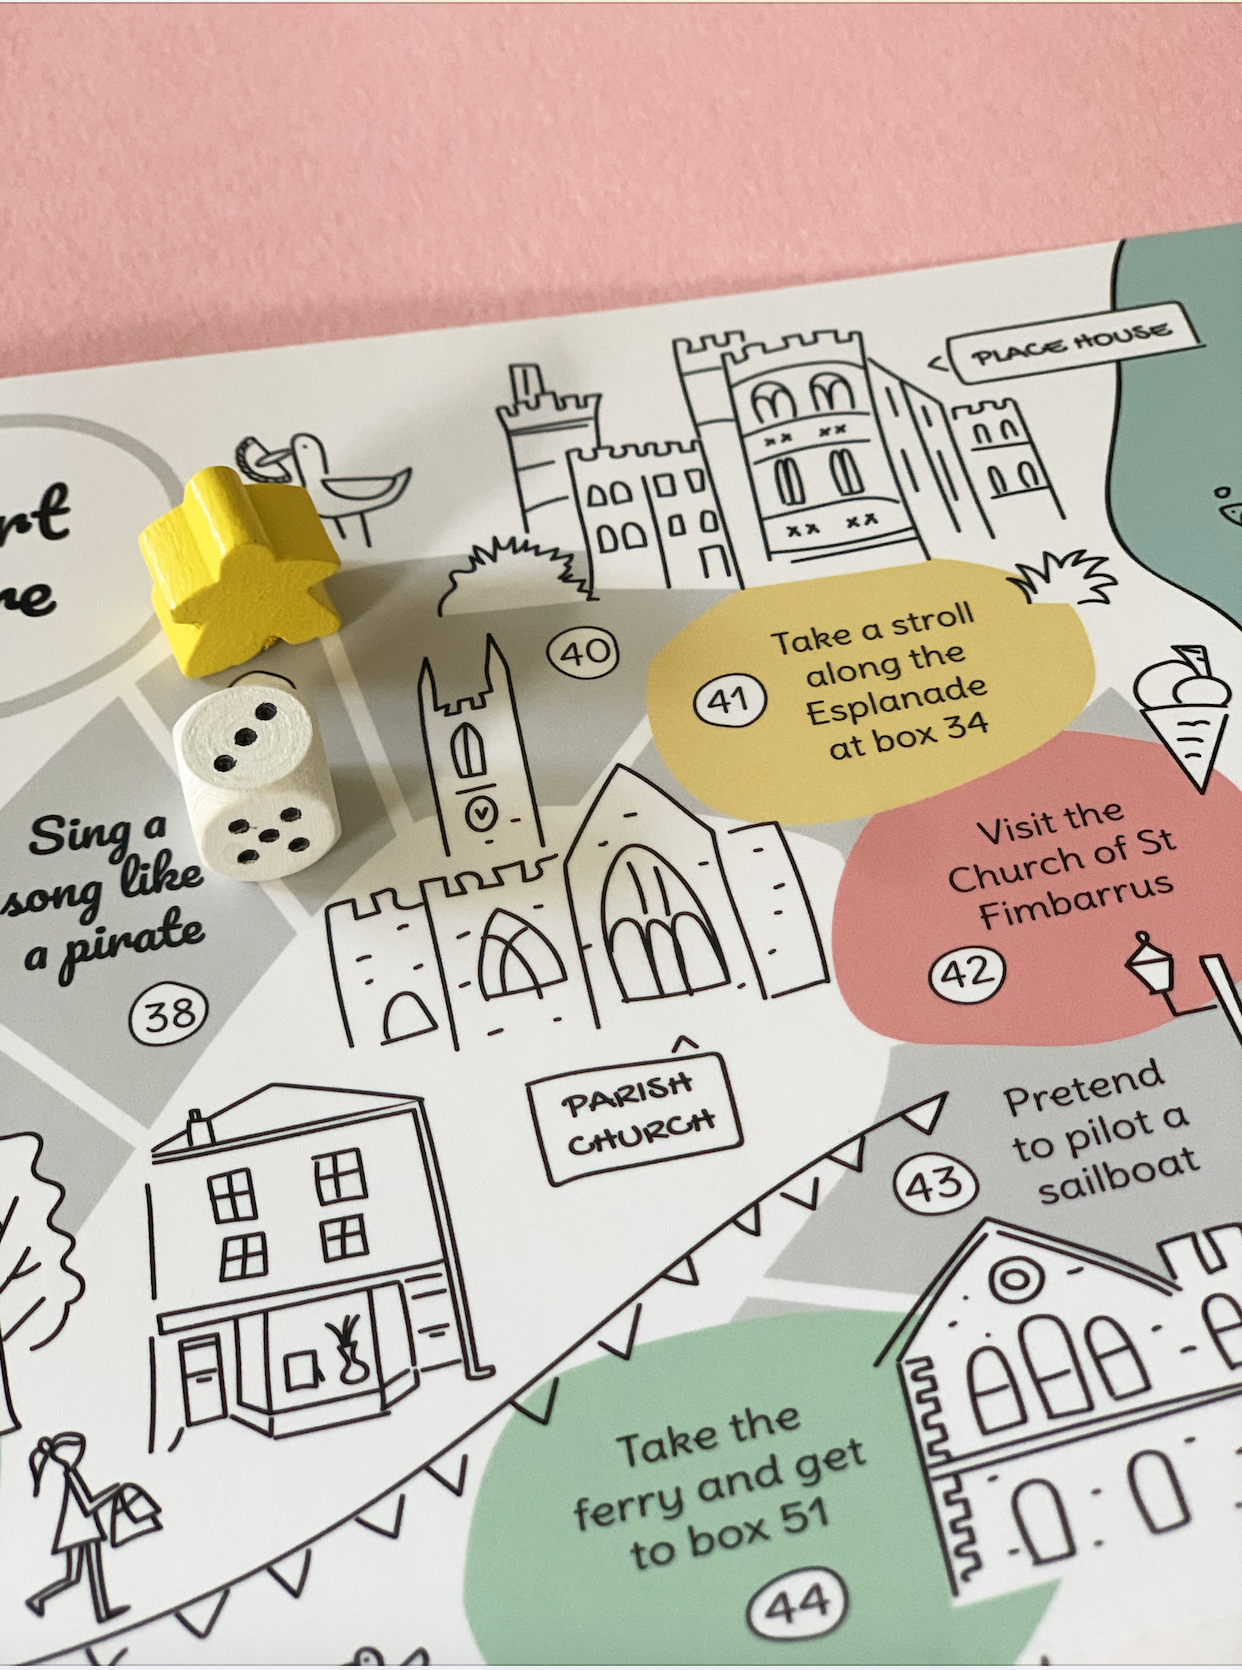 Fowey board game map detail with wooden dice and yellow marker, featuring the Place House and St Fimbarrus Parish Church.